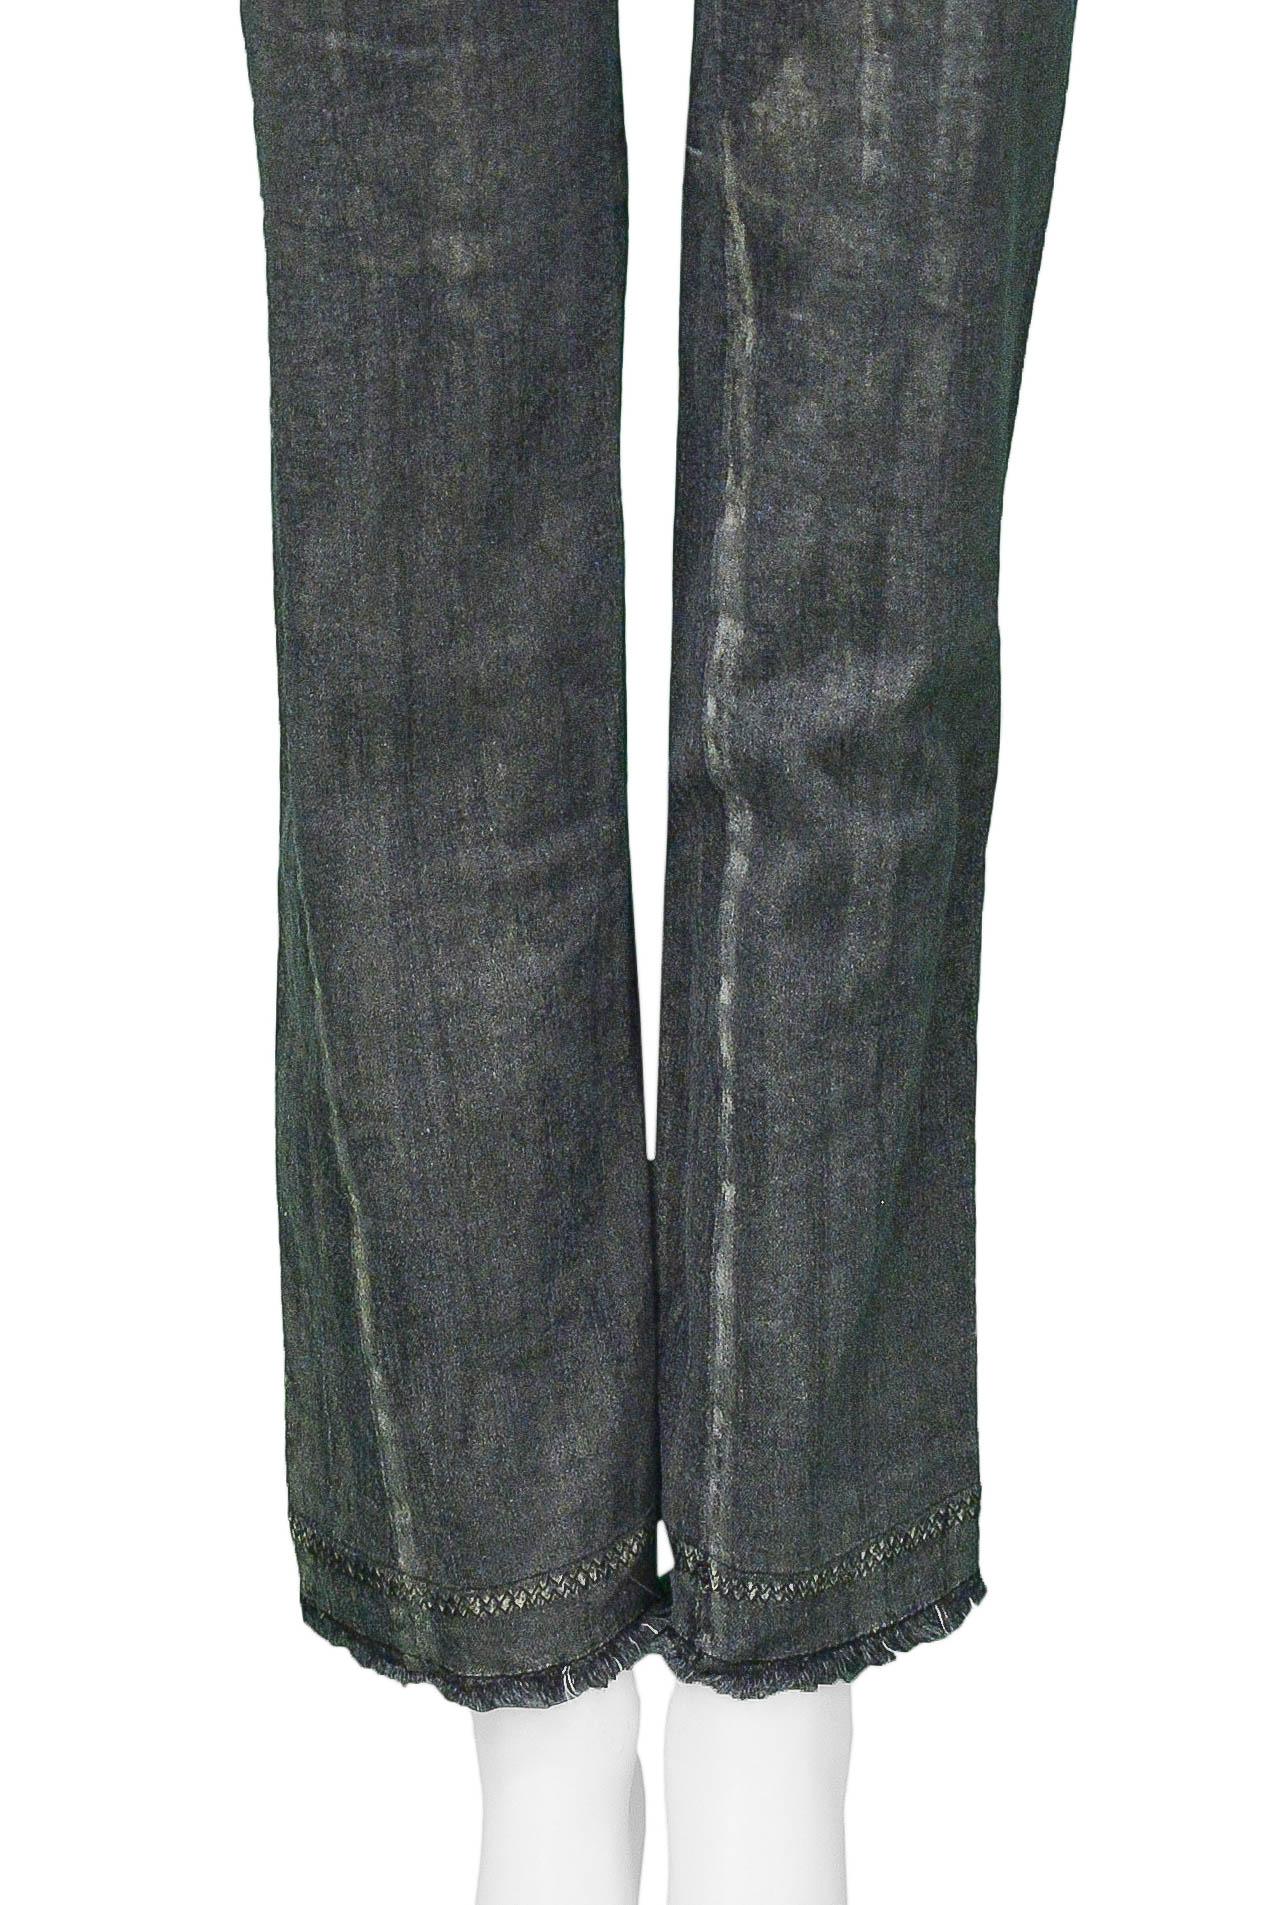 Women's Christian Dior Grey Denim Jeans With Gold Wax 2006 For Sale